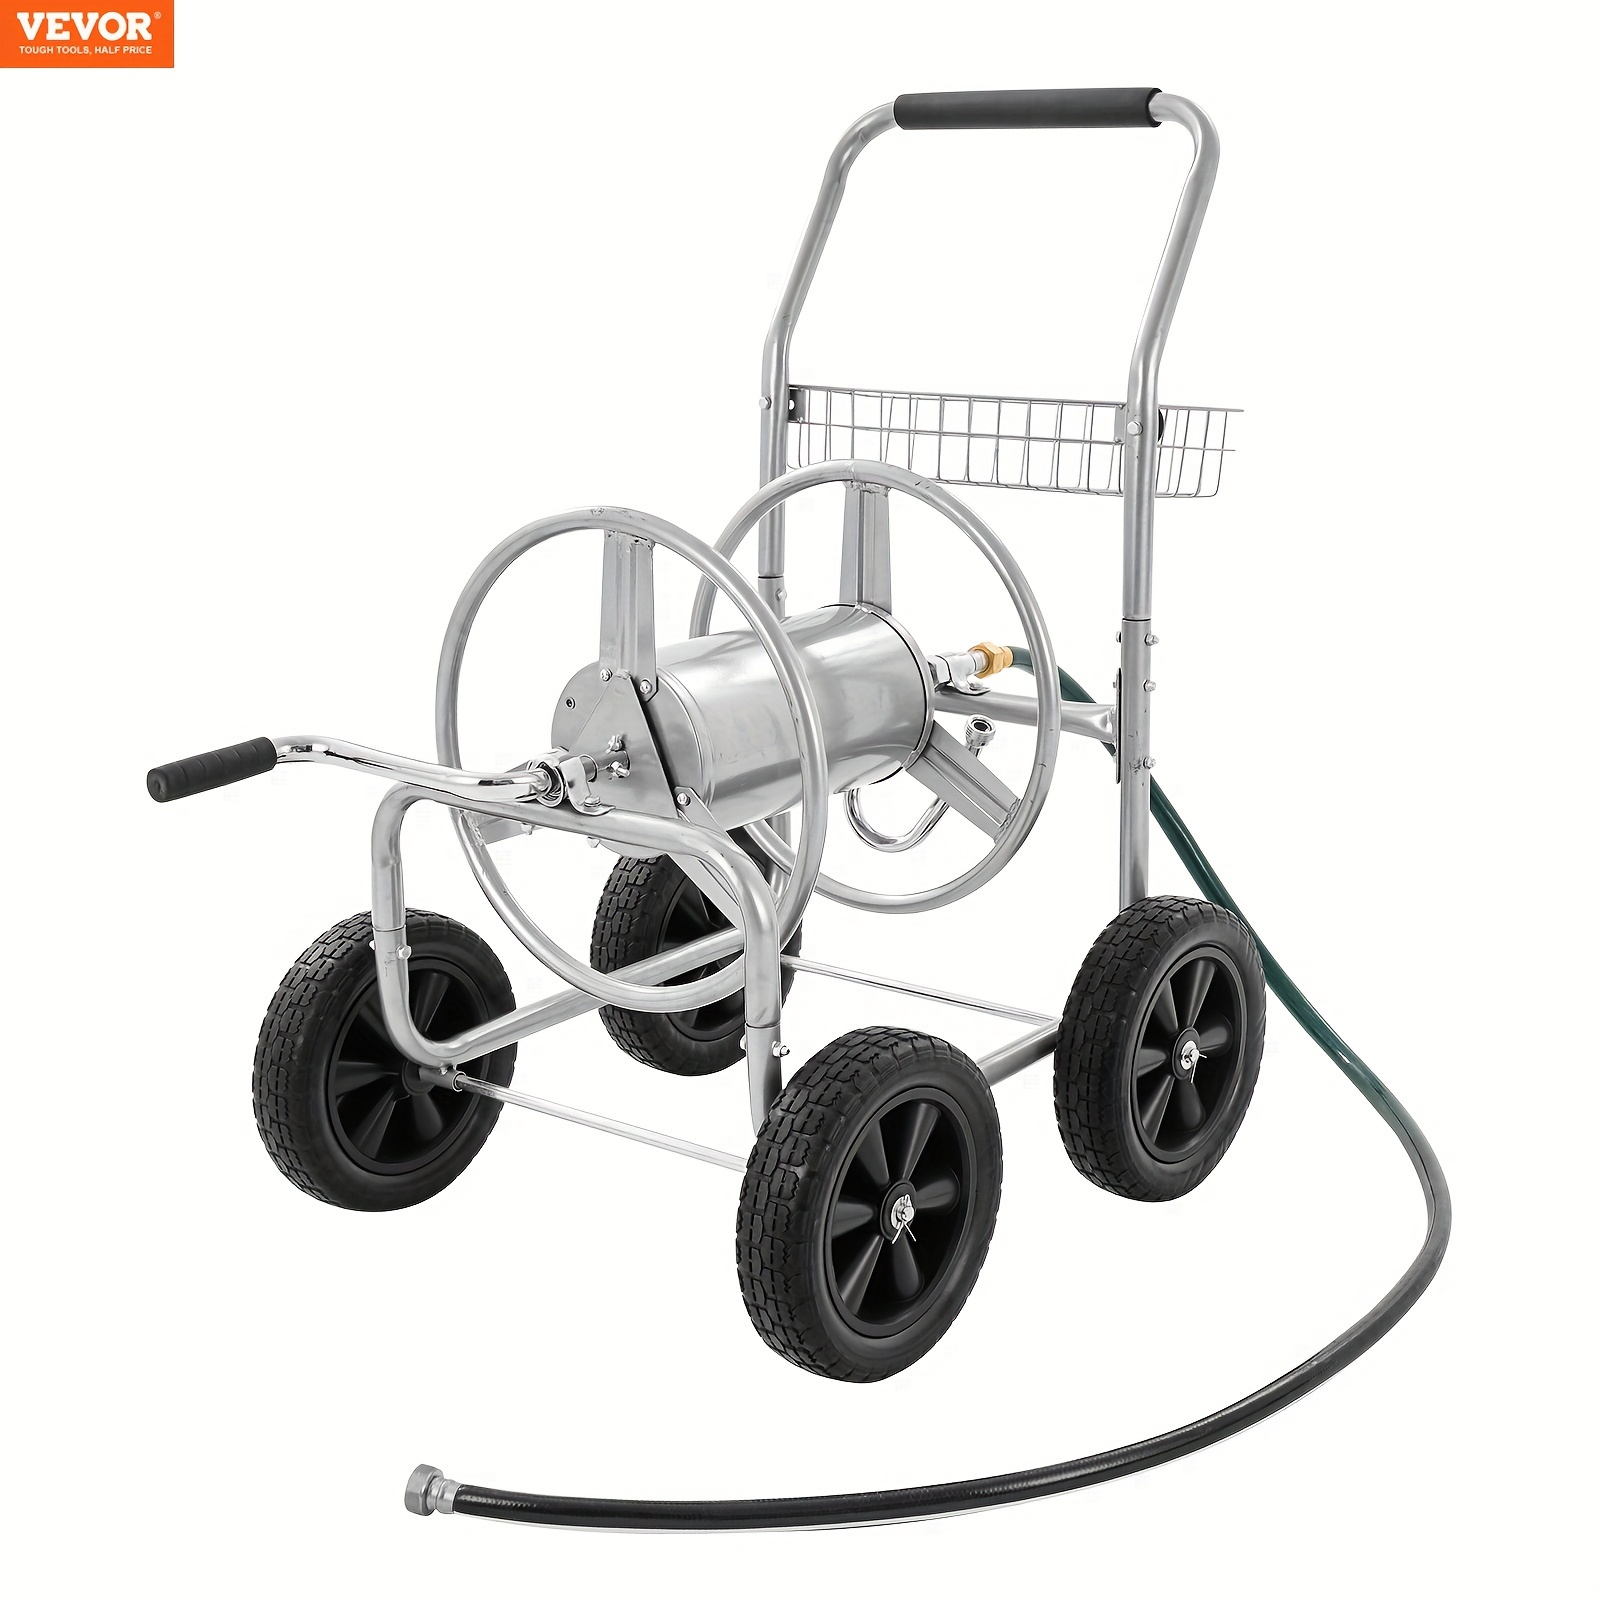 

Vevor Hose Reel Cart With Wheels, Metal Hose Reel Holds 300 Feet Of 5/8" Hose Capacity Heavy Duty Outdoor Water Planting Truck For Yard, Garden